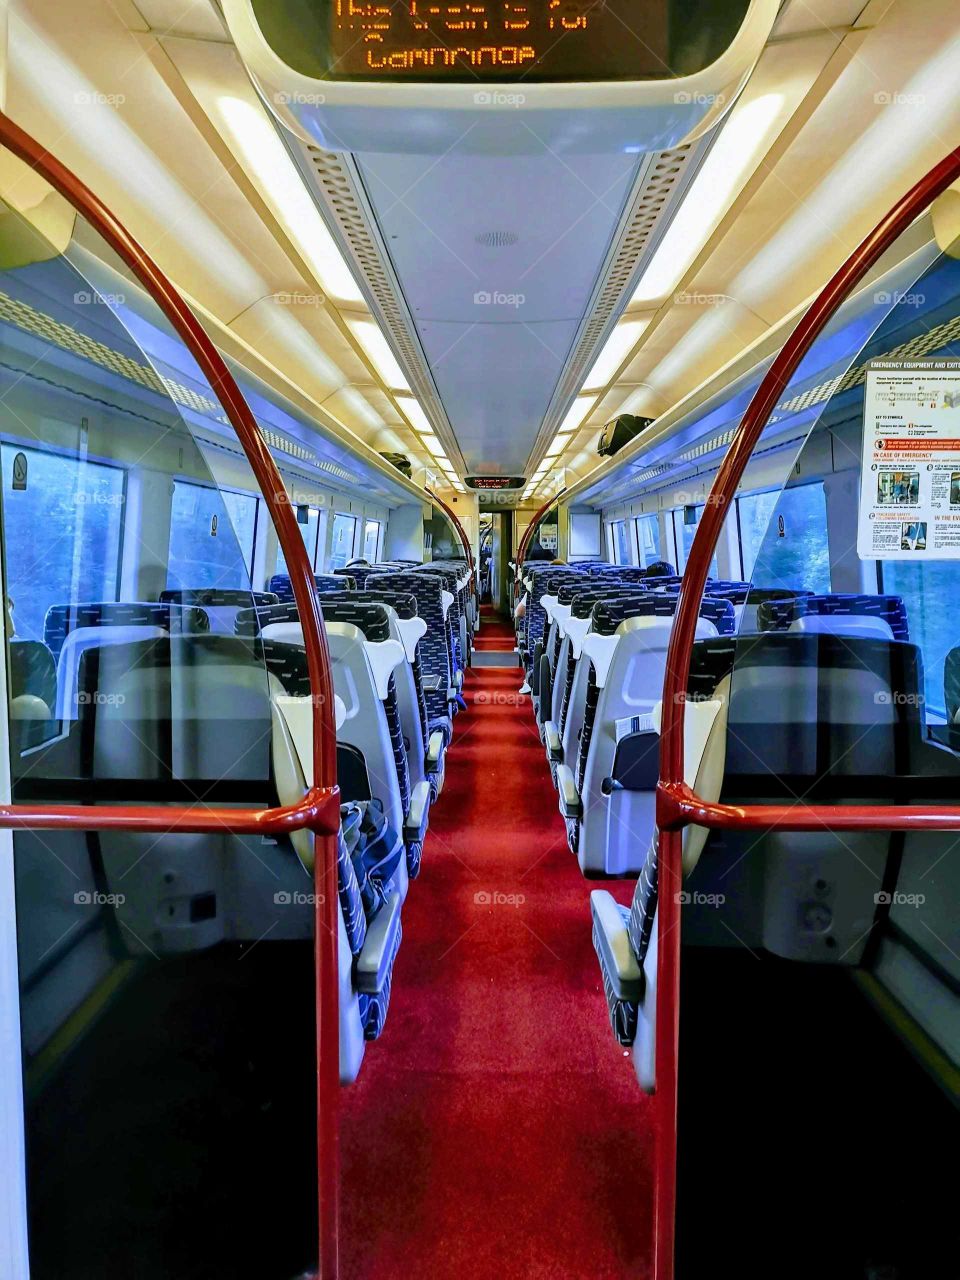 Central View of Passenger Aisle on board English Train, 2019